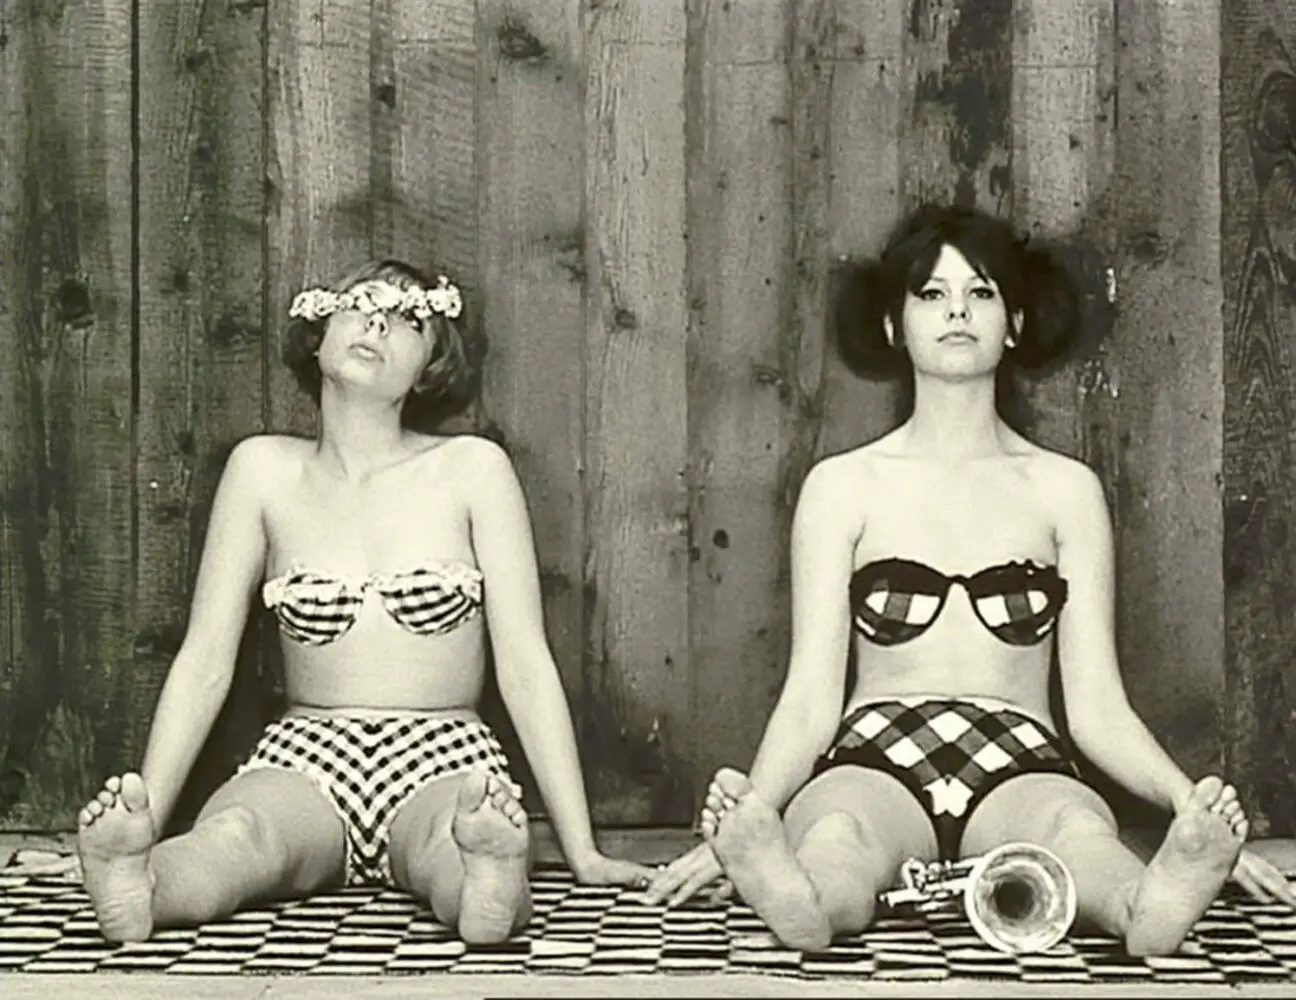 Marie II and Marie I sitting in bathing suits